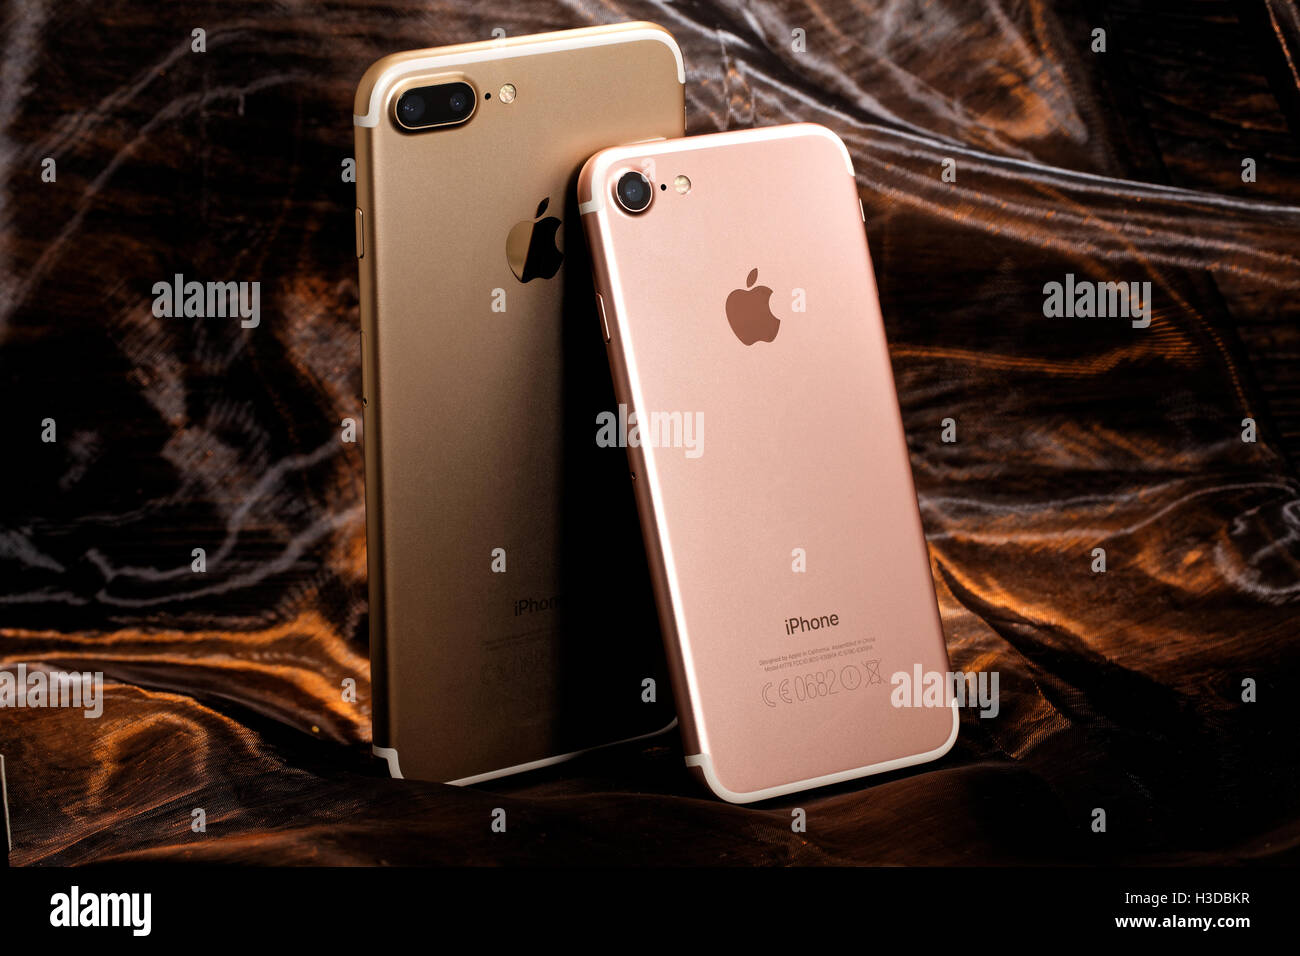 Golden iPhone 7 Plus and pink iPhone 7 Stock Photo - Alamy